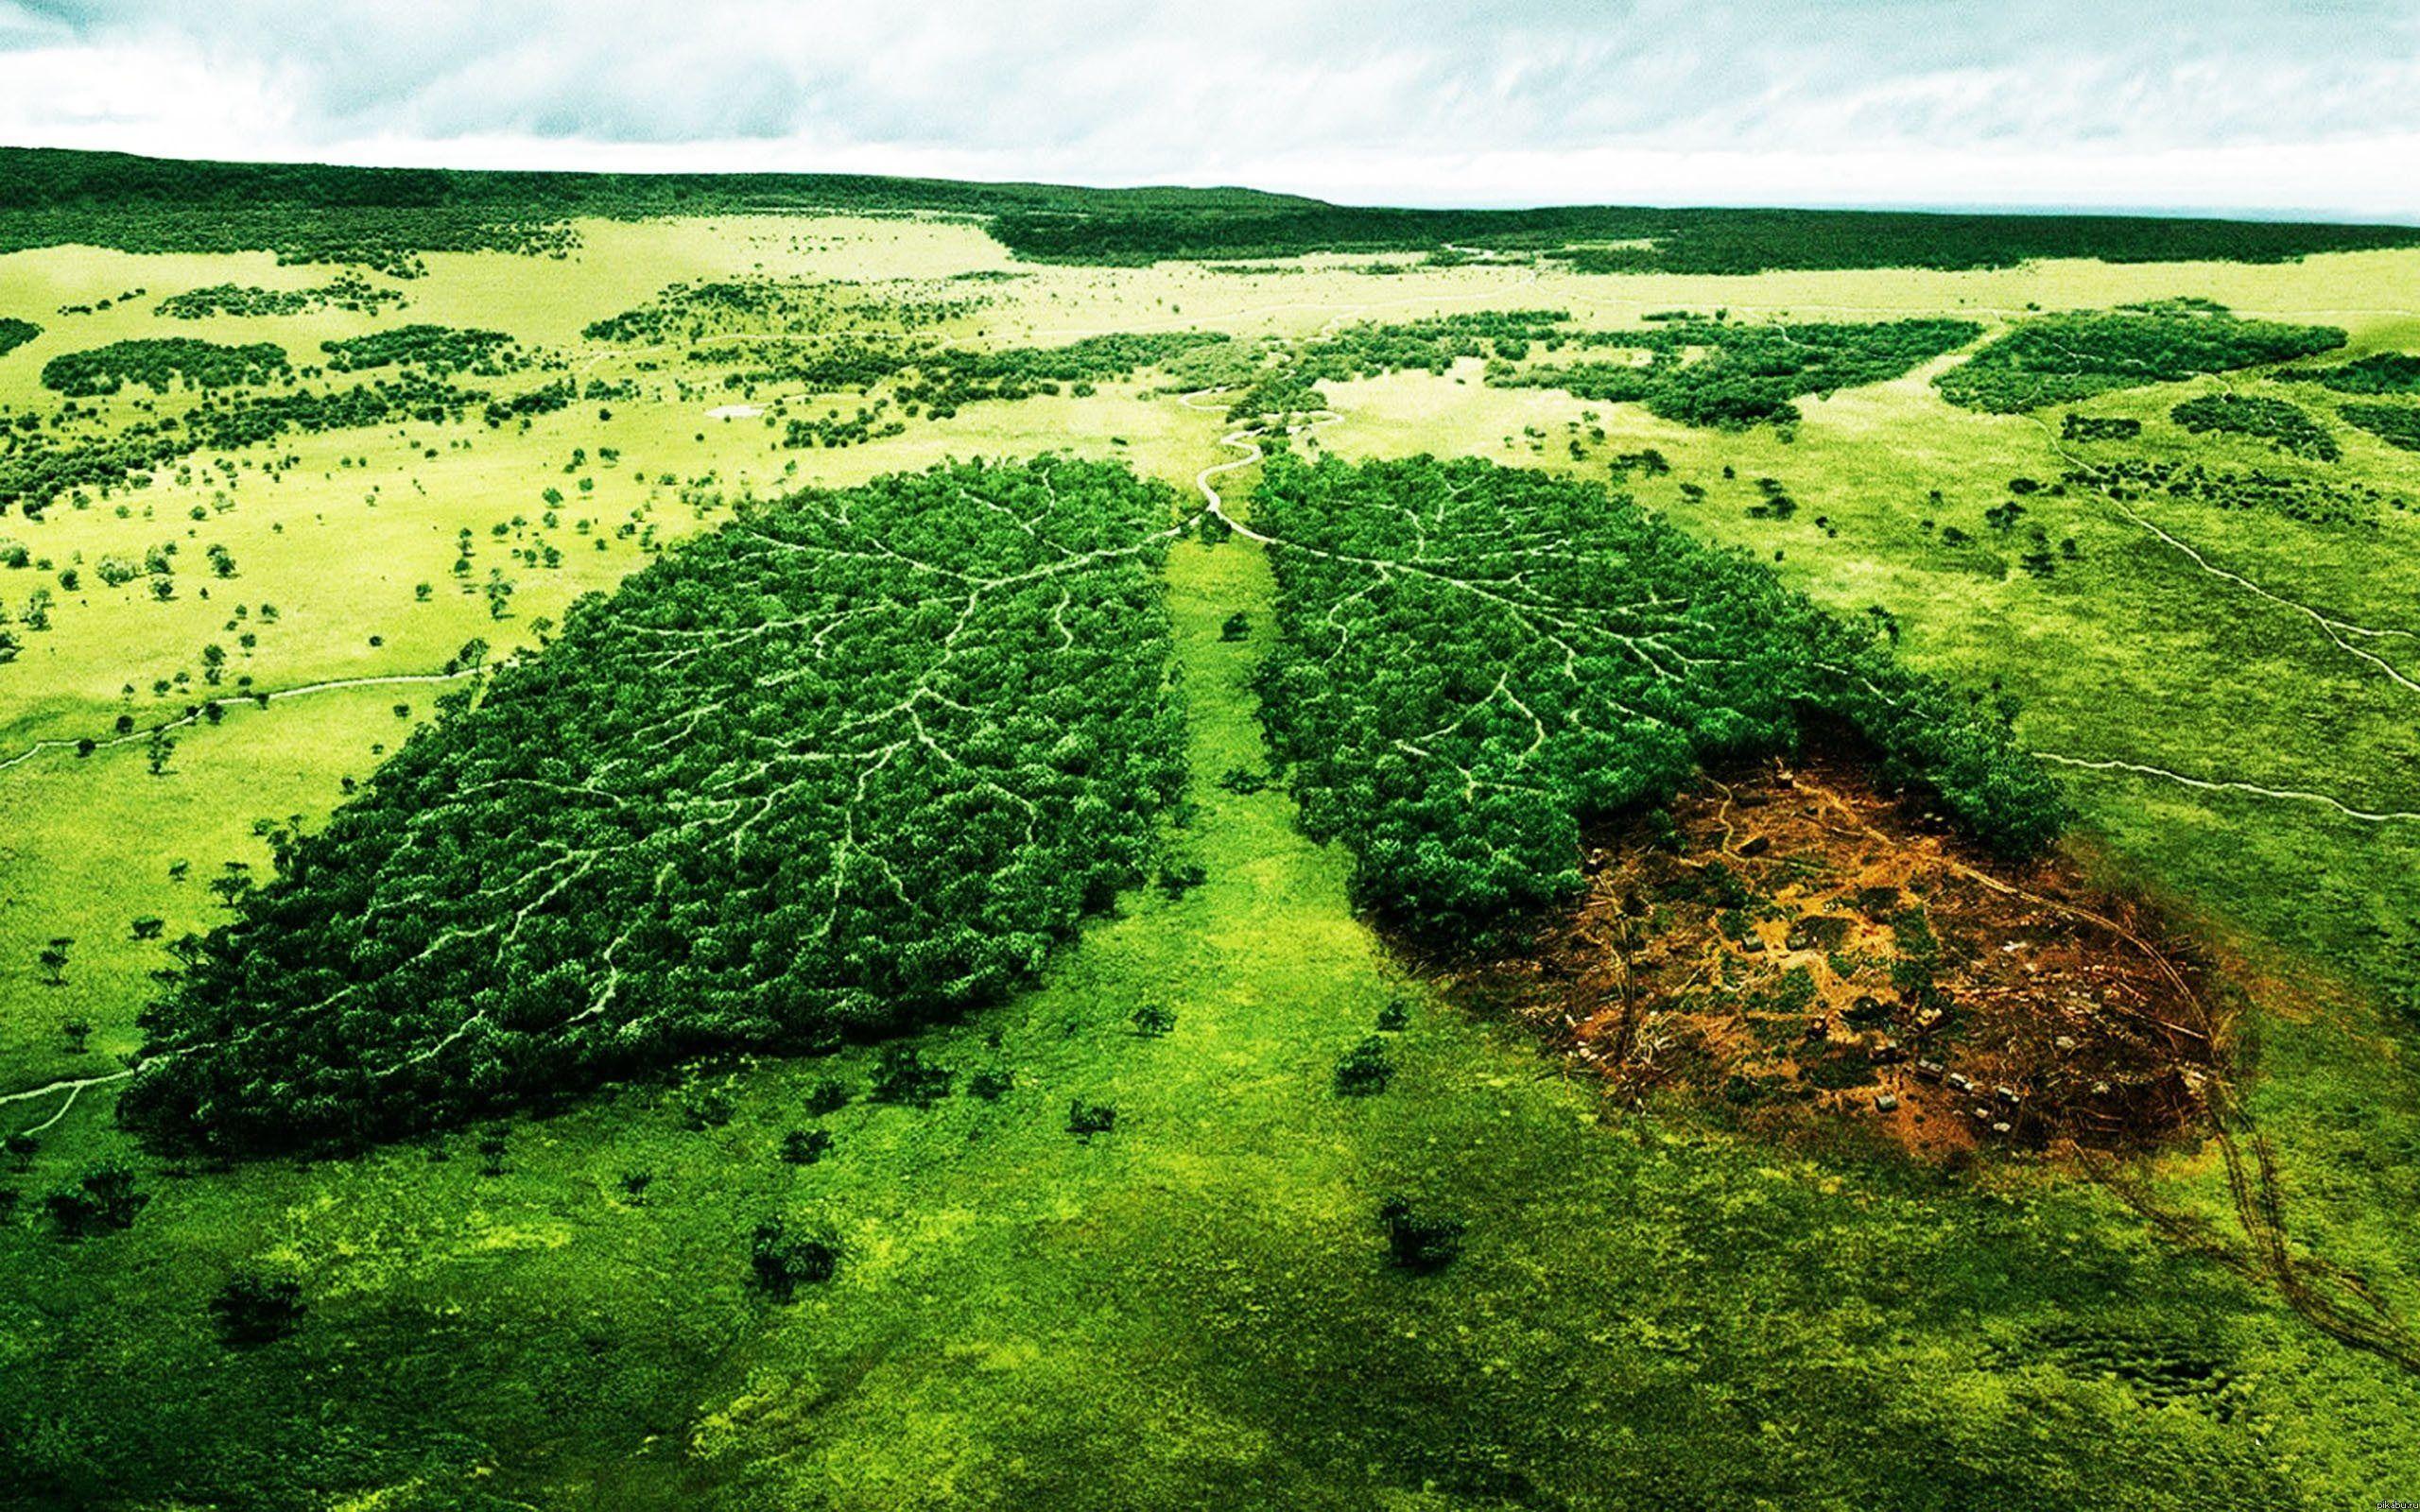 Download wallpaper ecology, deforestation, forest, lungs of Planet